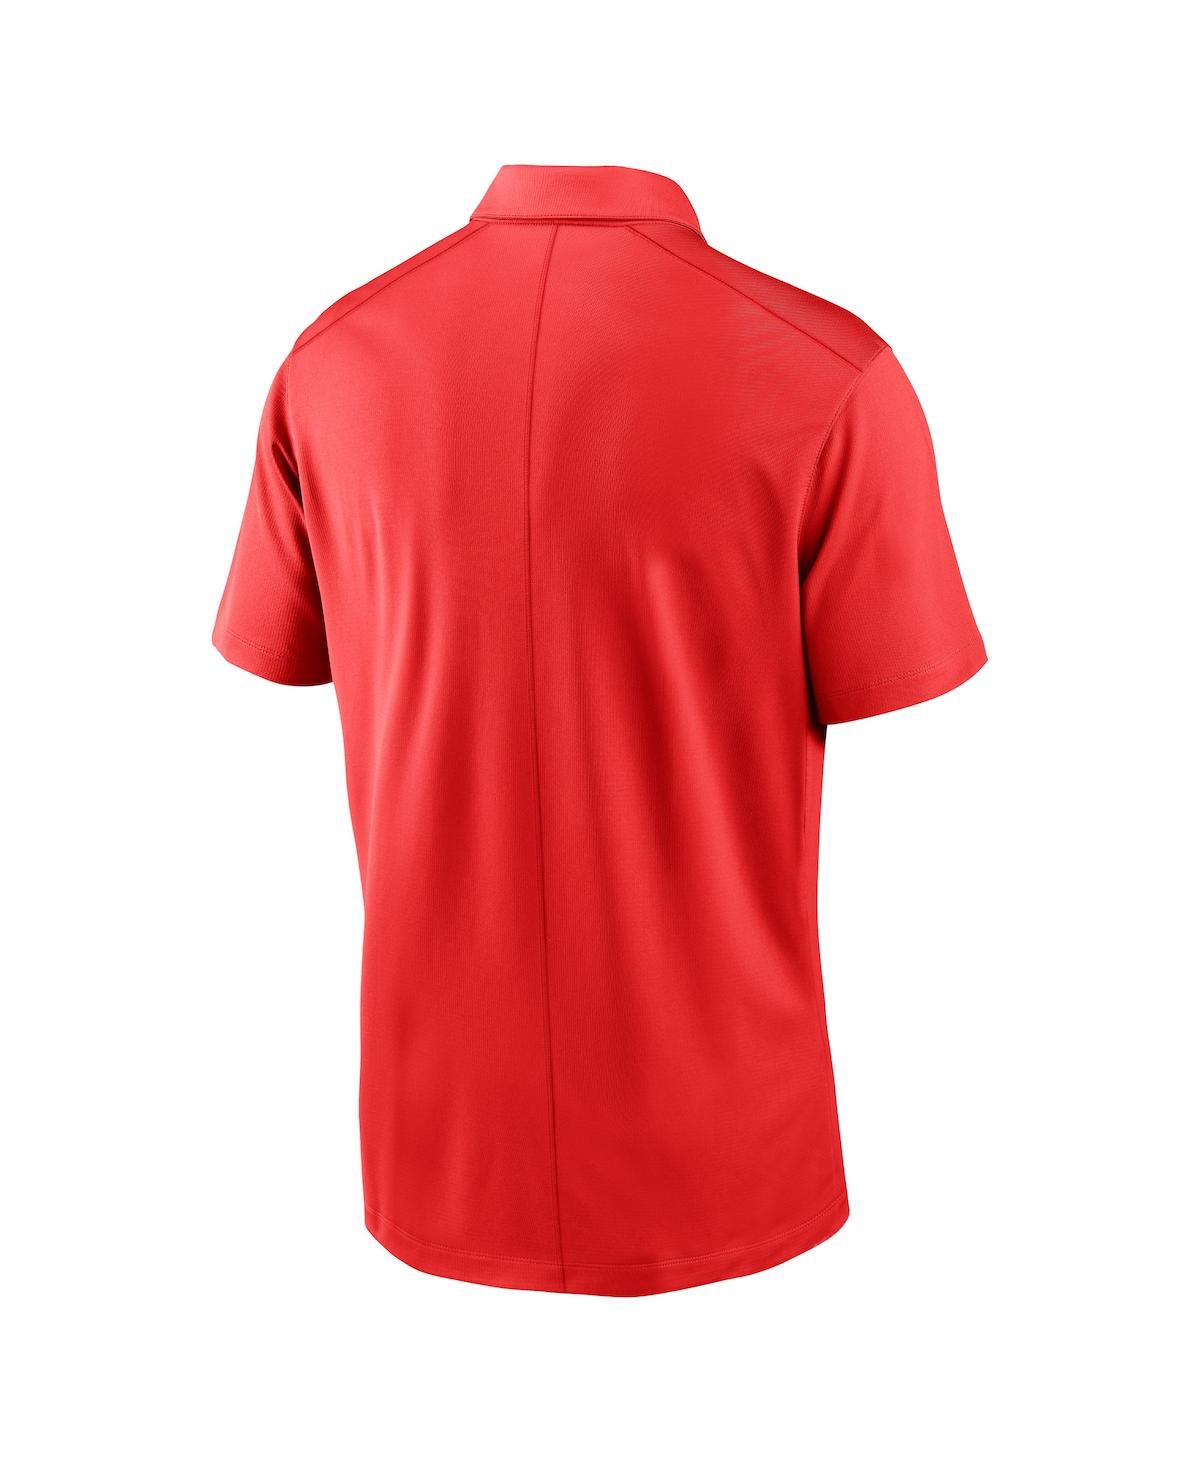 Shop Nike Men's  Red Usmnt Victory Performance Polo Shirt